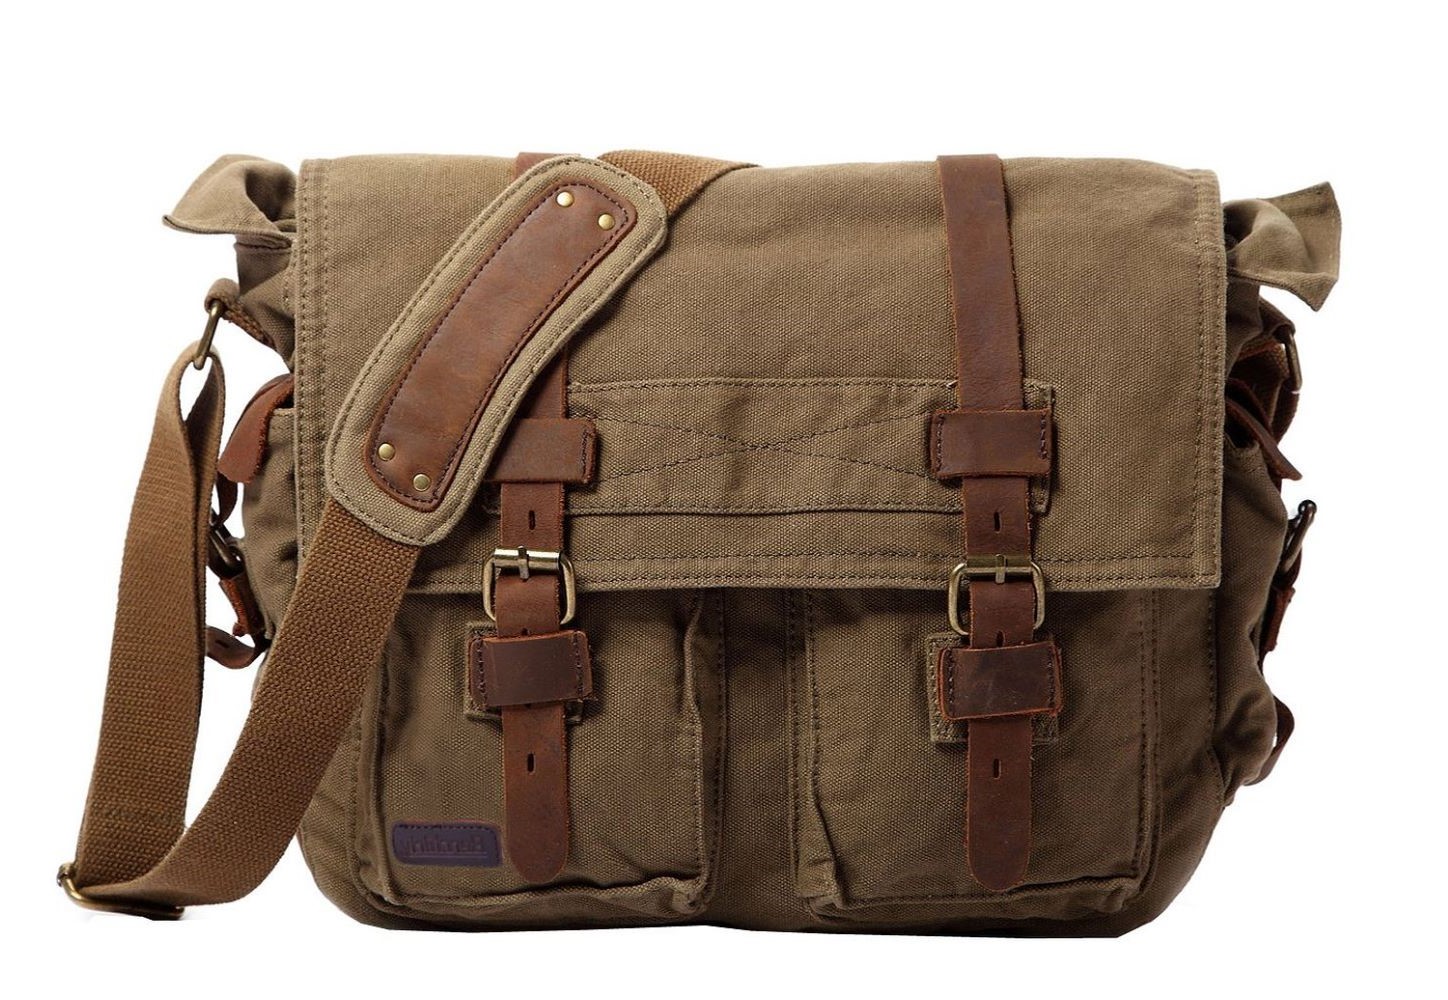 Stylish and Functional Men's Messenger Bag Review: A Must-Have for Him